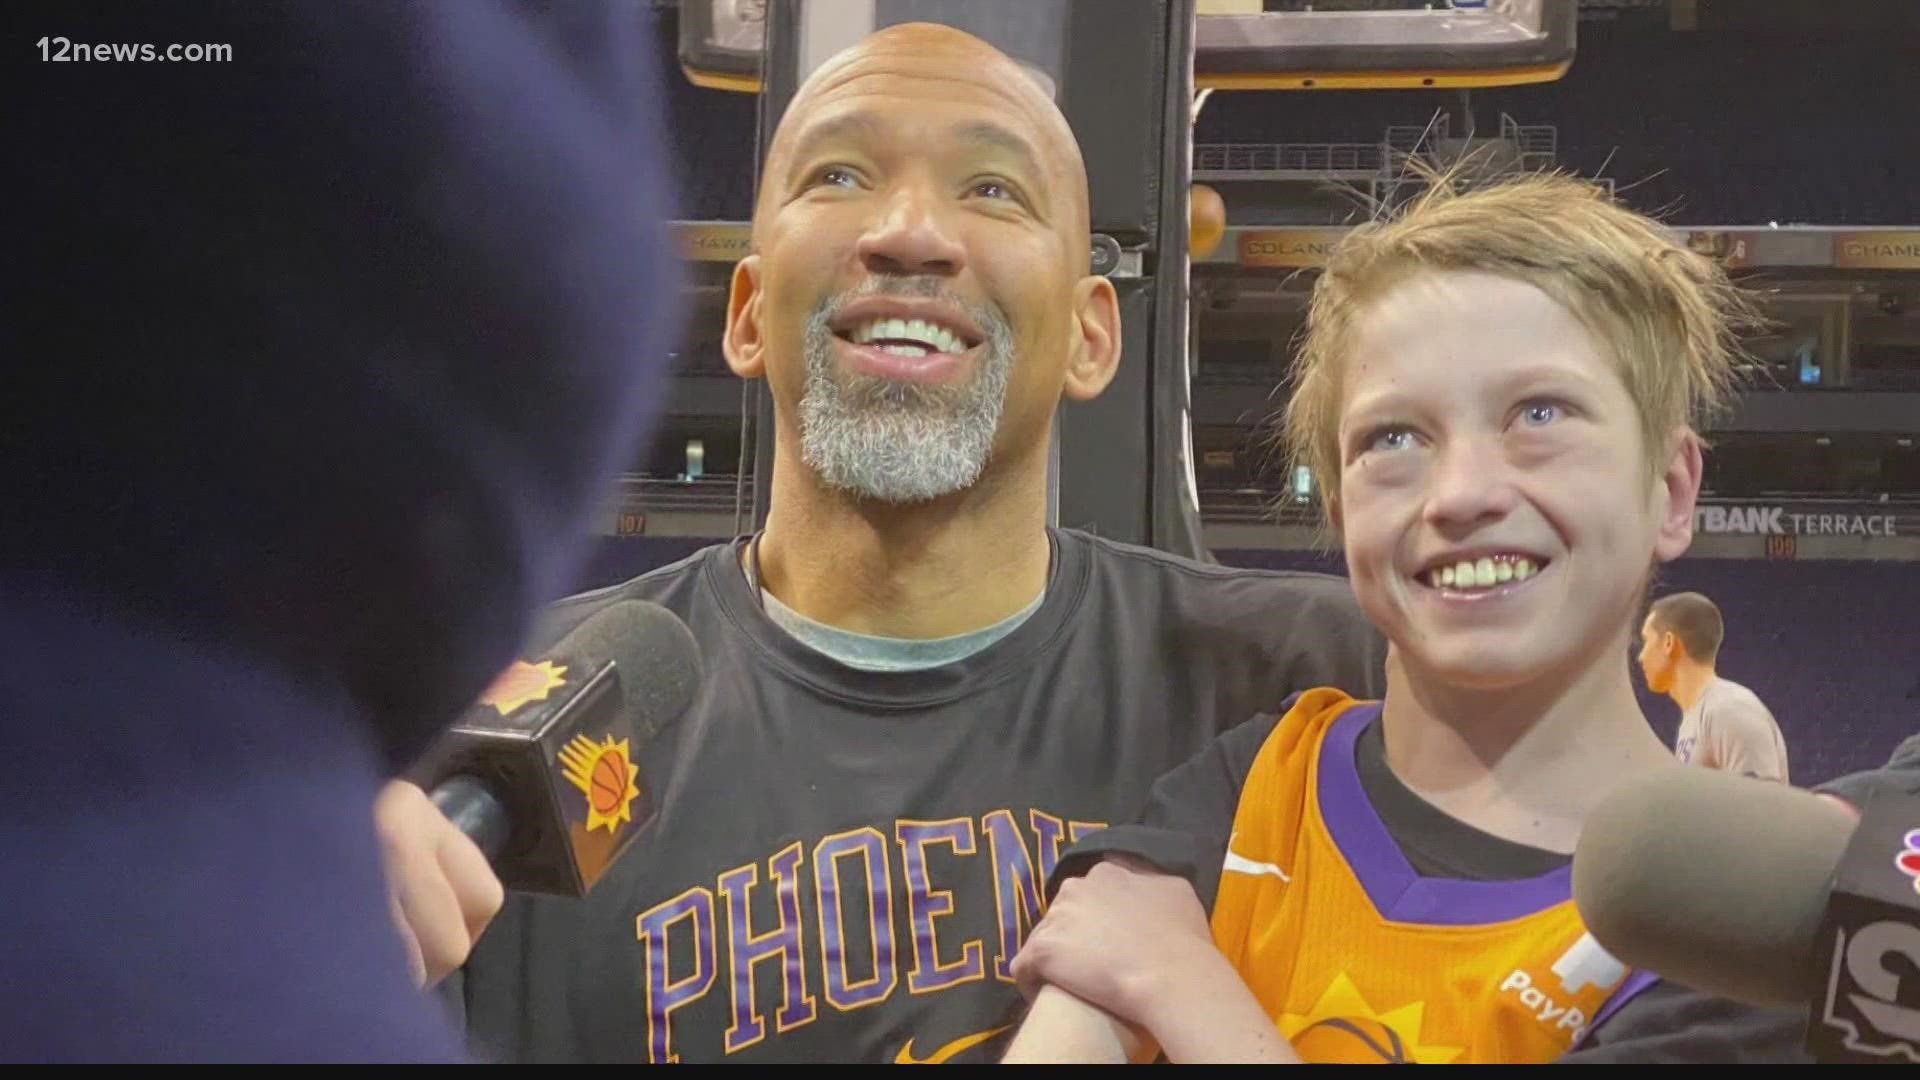 Nathan Garcia came to visit a Suns practice all the way from Perth, Australia while nearing the end of his life.